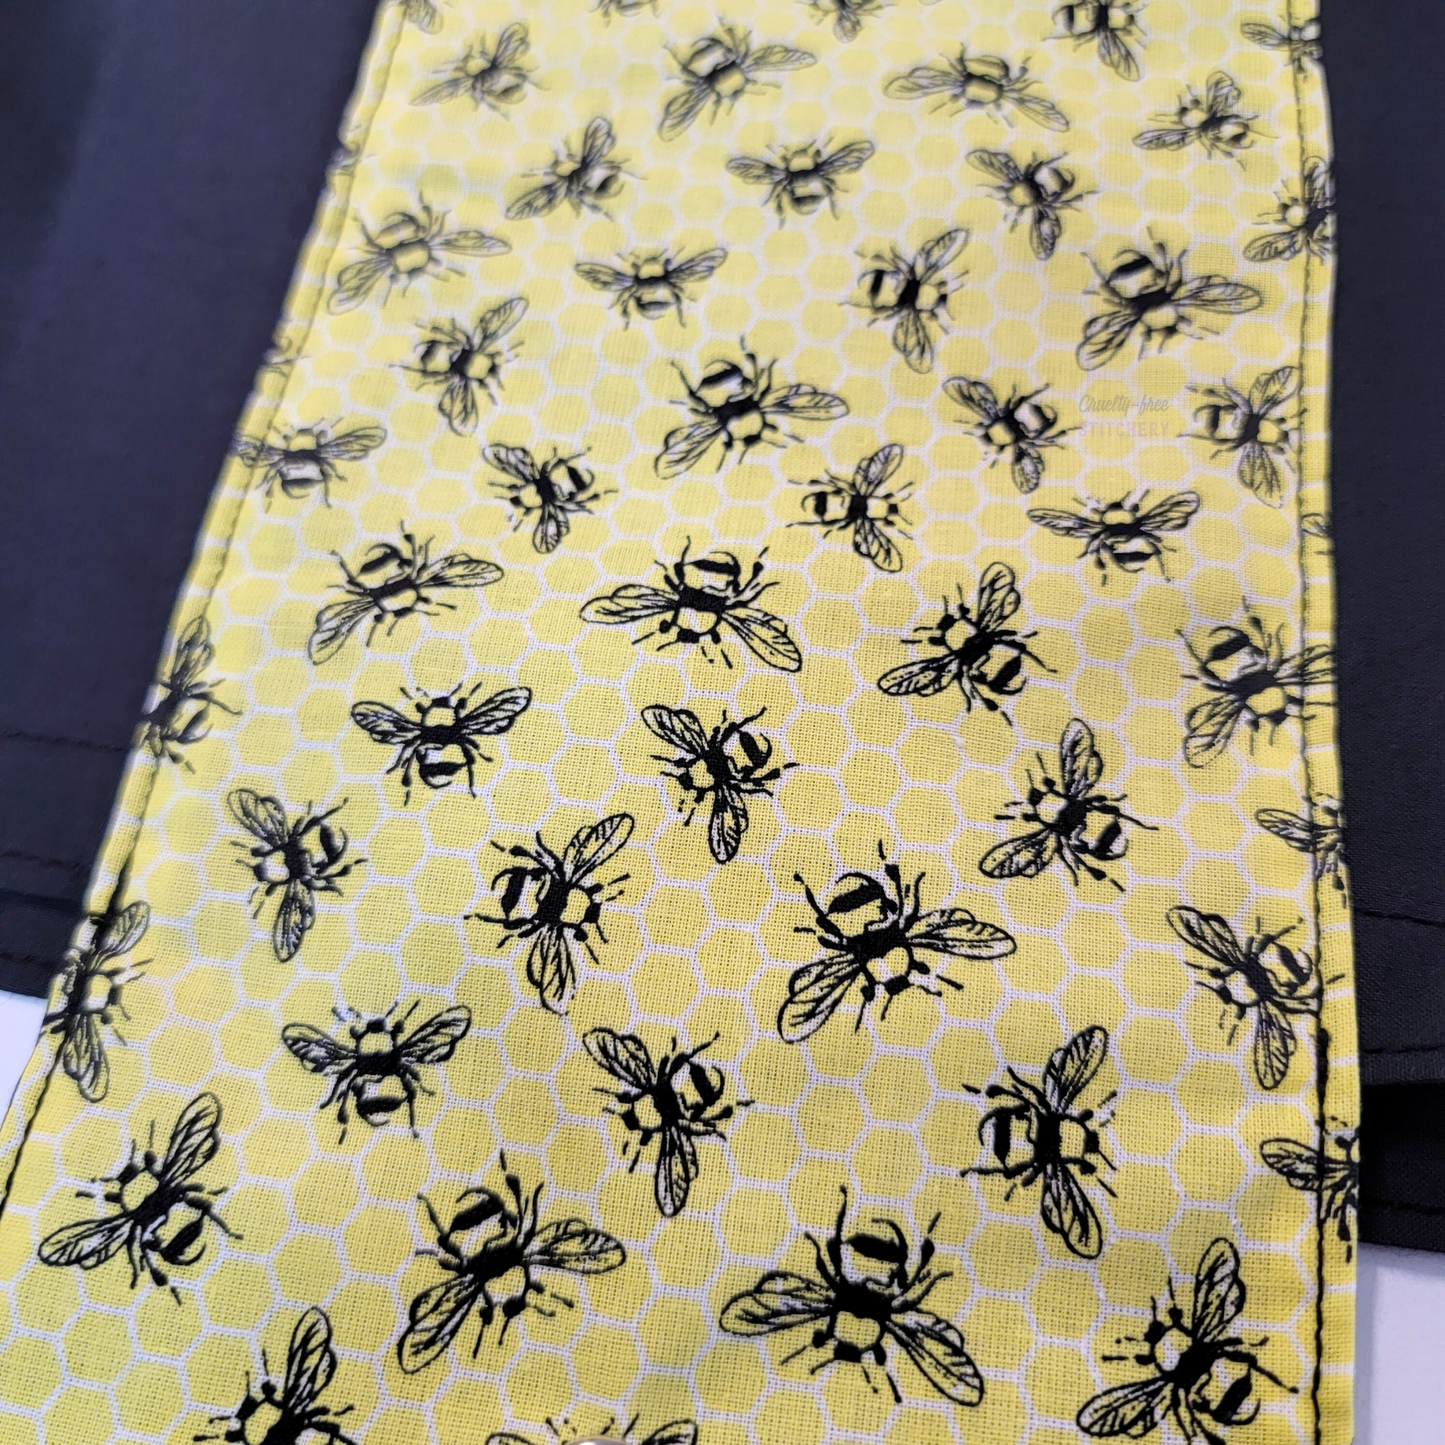 A close-up of the bee print, showing that there is a subtle honeycomb pattern in the background.